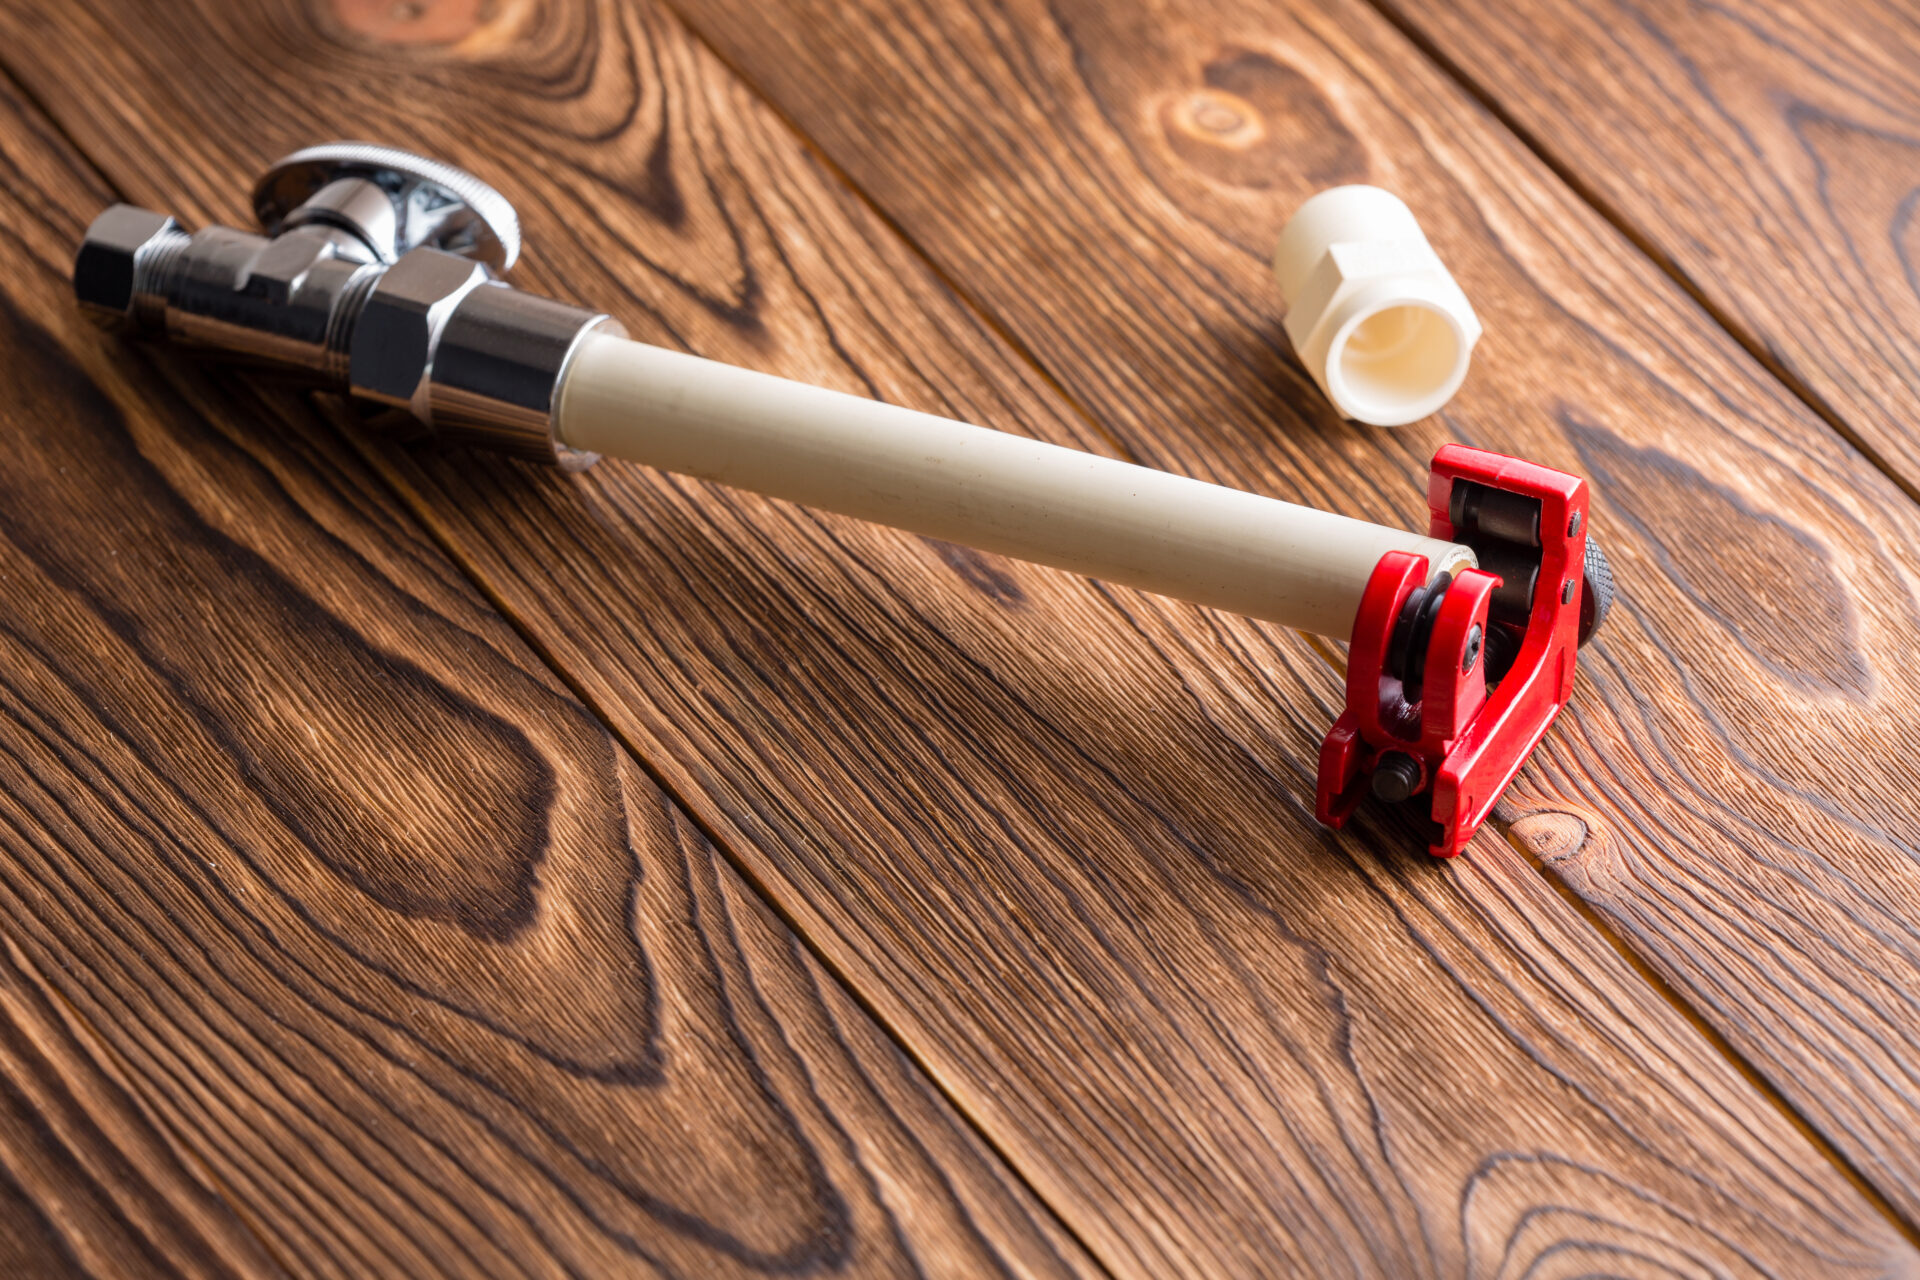 CPVC pipe for a plumbing installation or repair in a bright red pipe cutter over a wooden table. MidCity Plumbers